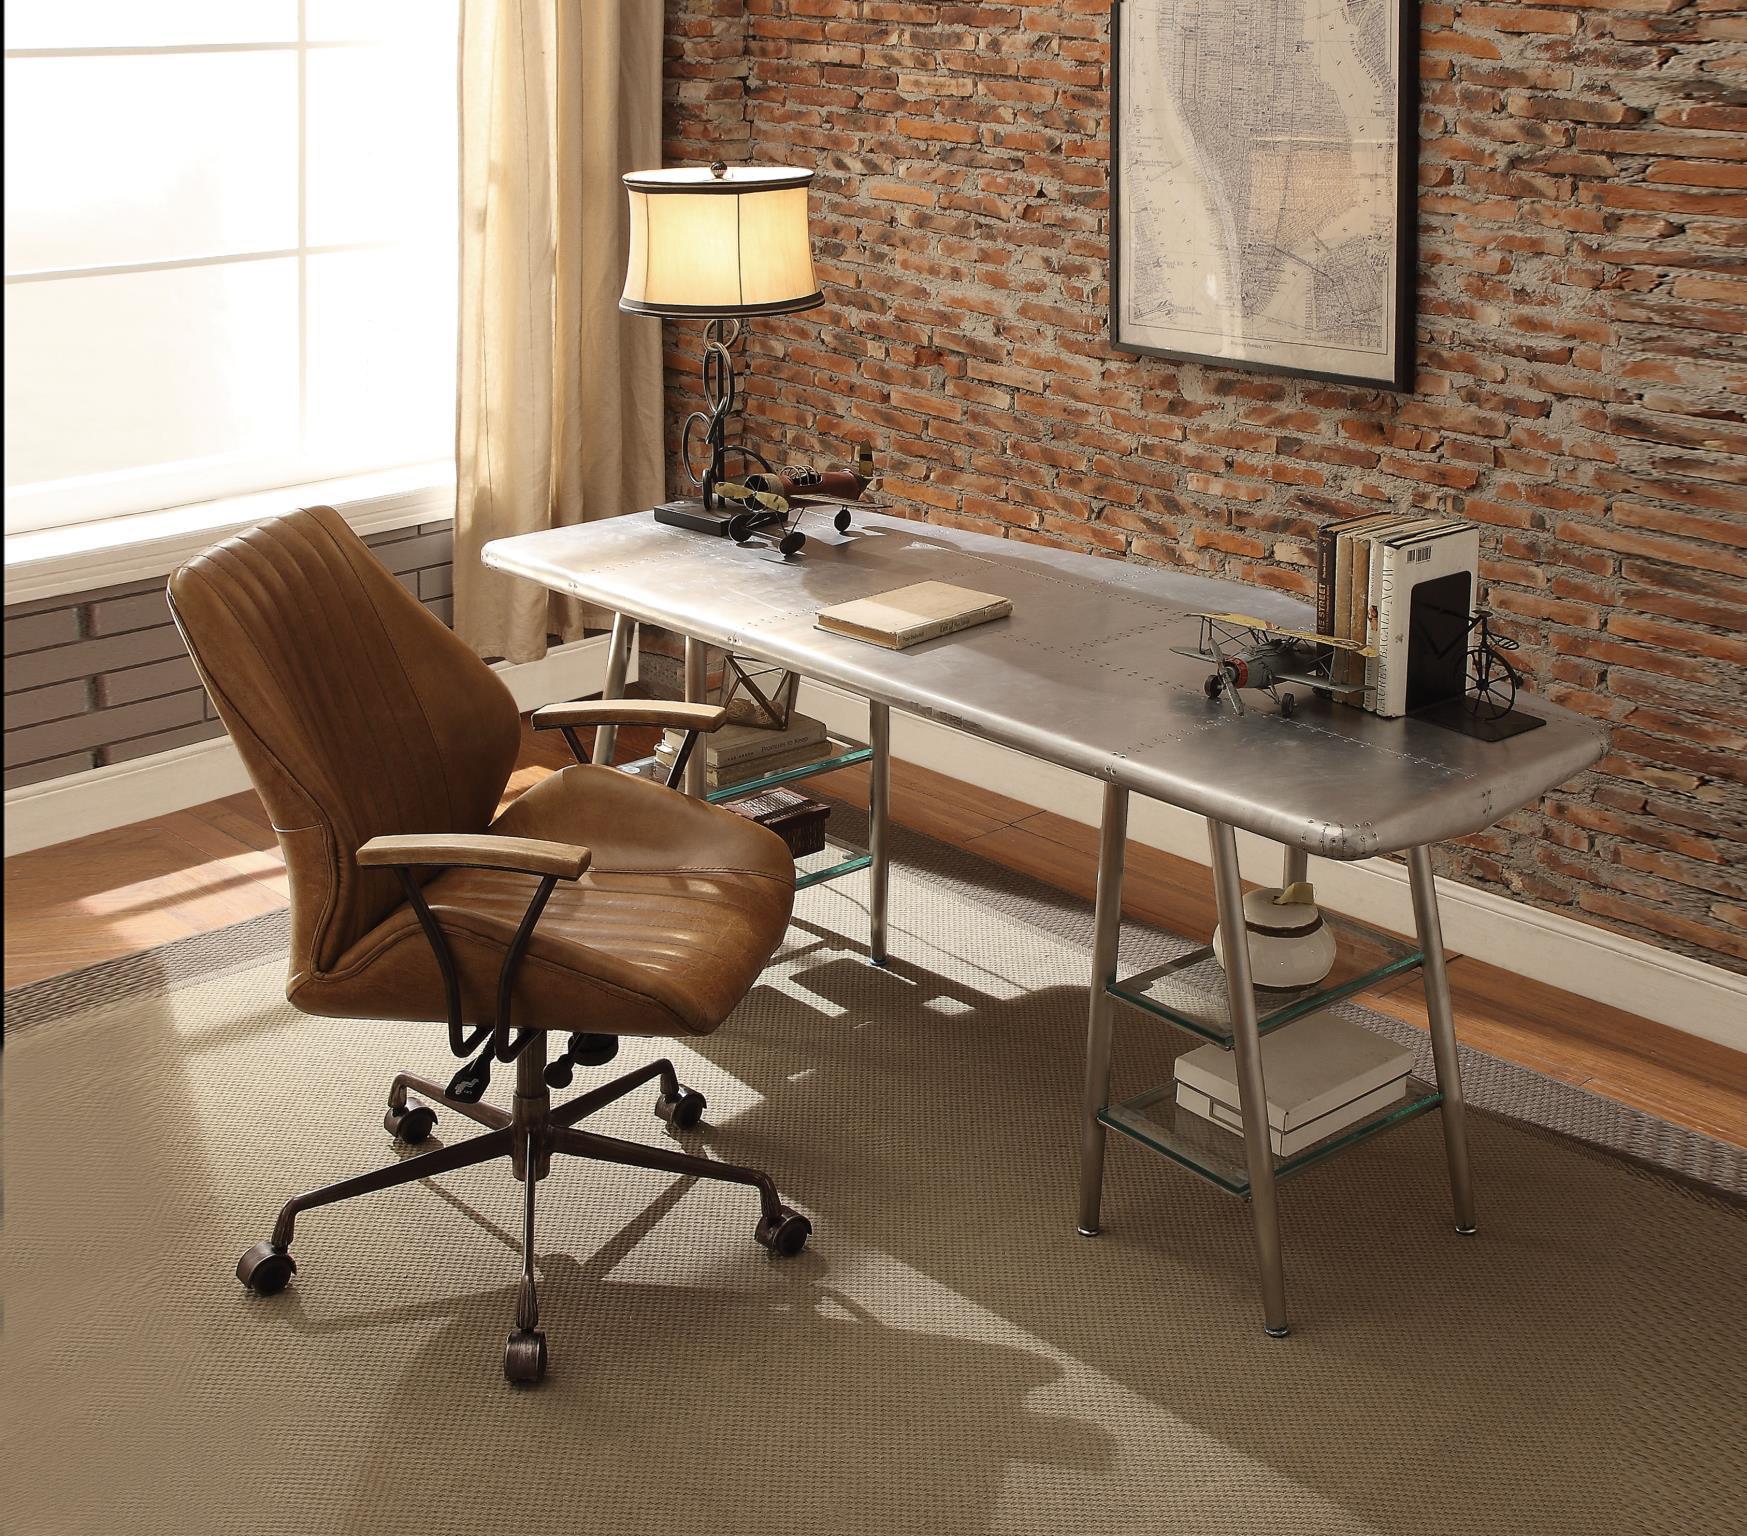 Vintage Home Office Set Brancaster-Hamilton-92790-92413 92790-2PC in Metal, Cocoa, Brown Top grain leather